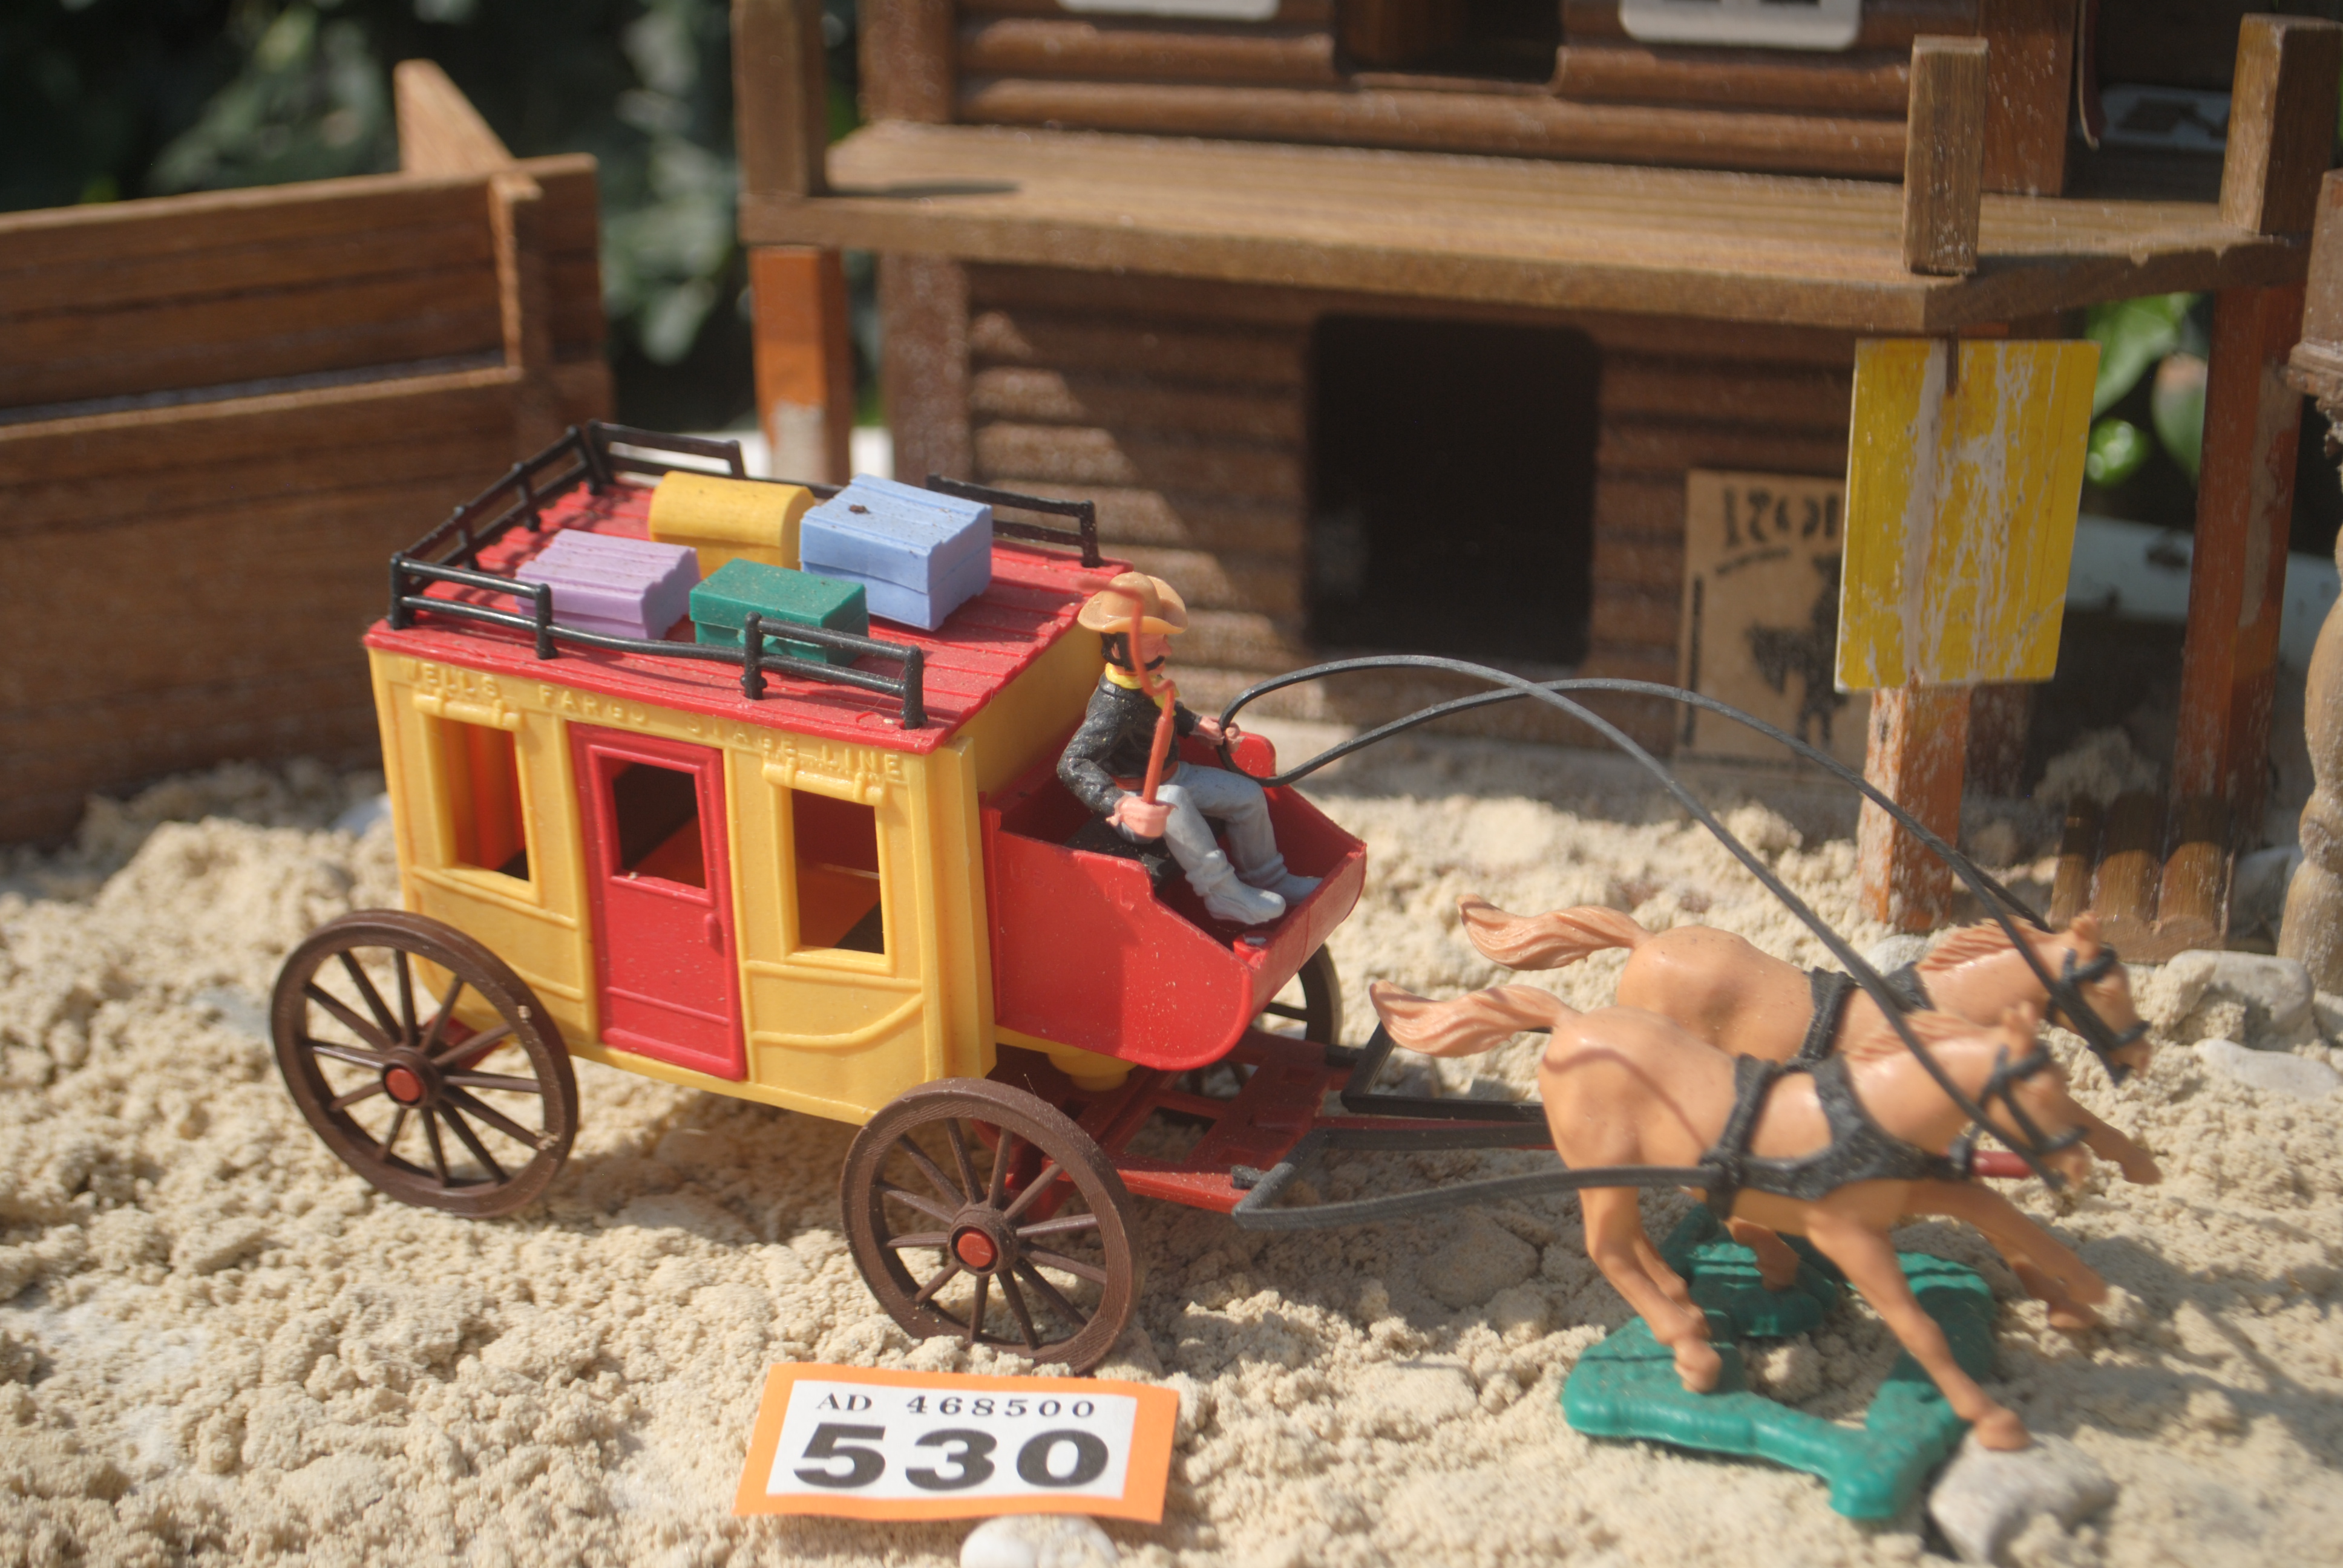 Timpo Toys O.530 Wells Fargo Stagecoach with coachman, 4th version